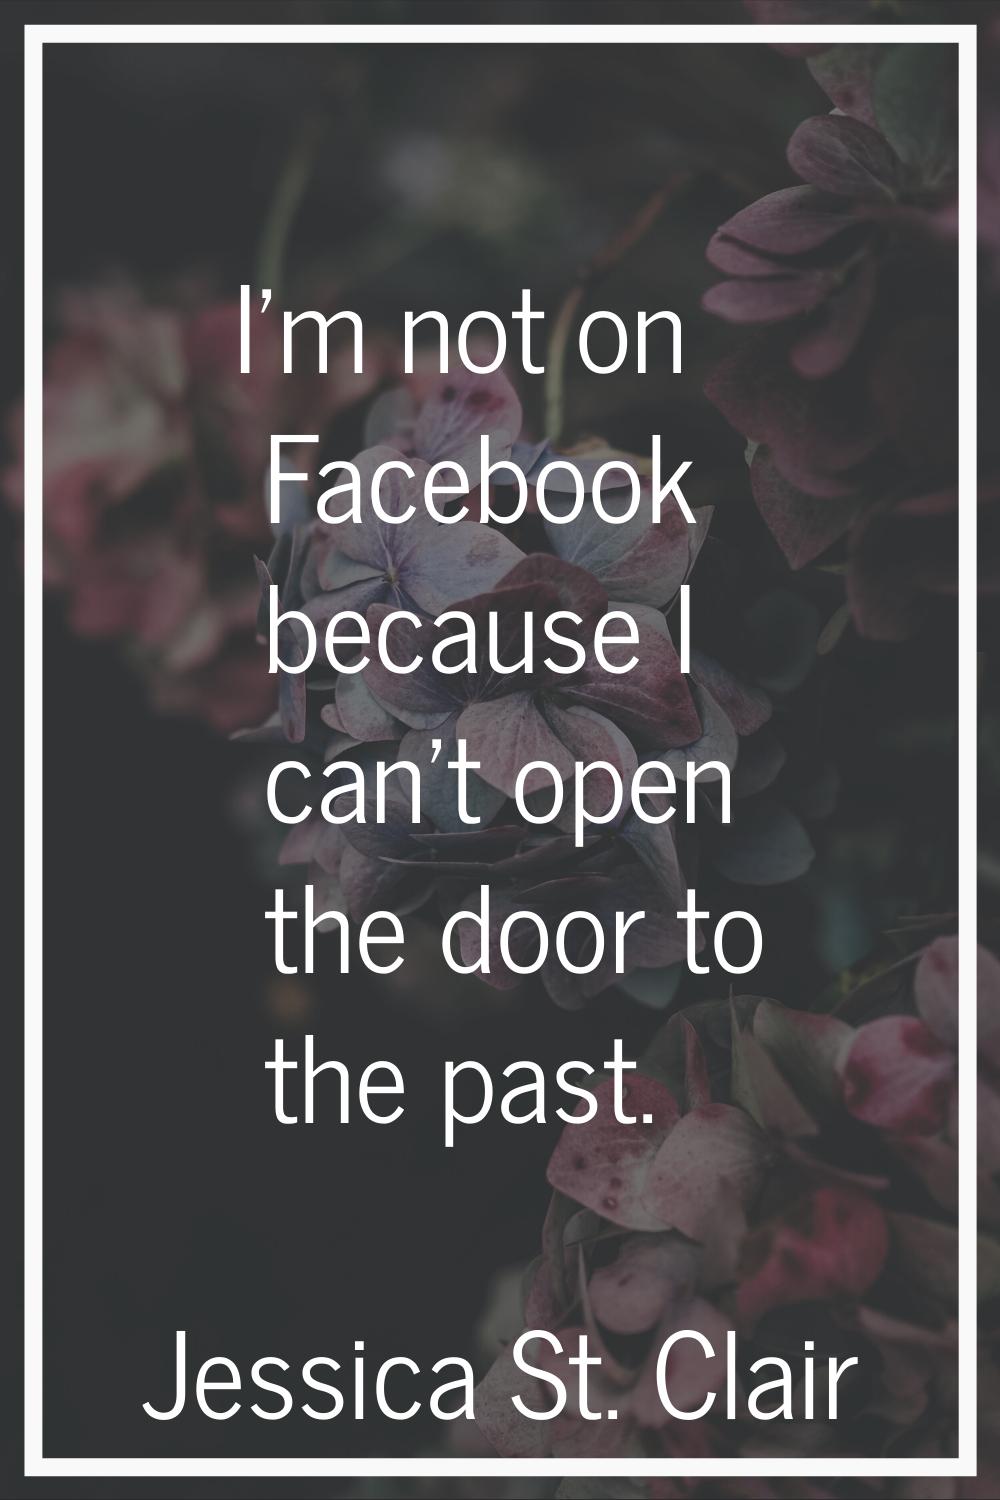 I'm not on Facebook because I can't open the door to the past.